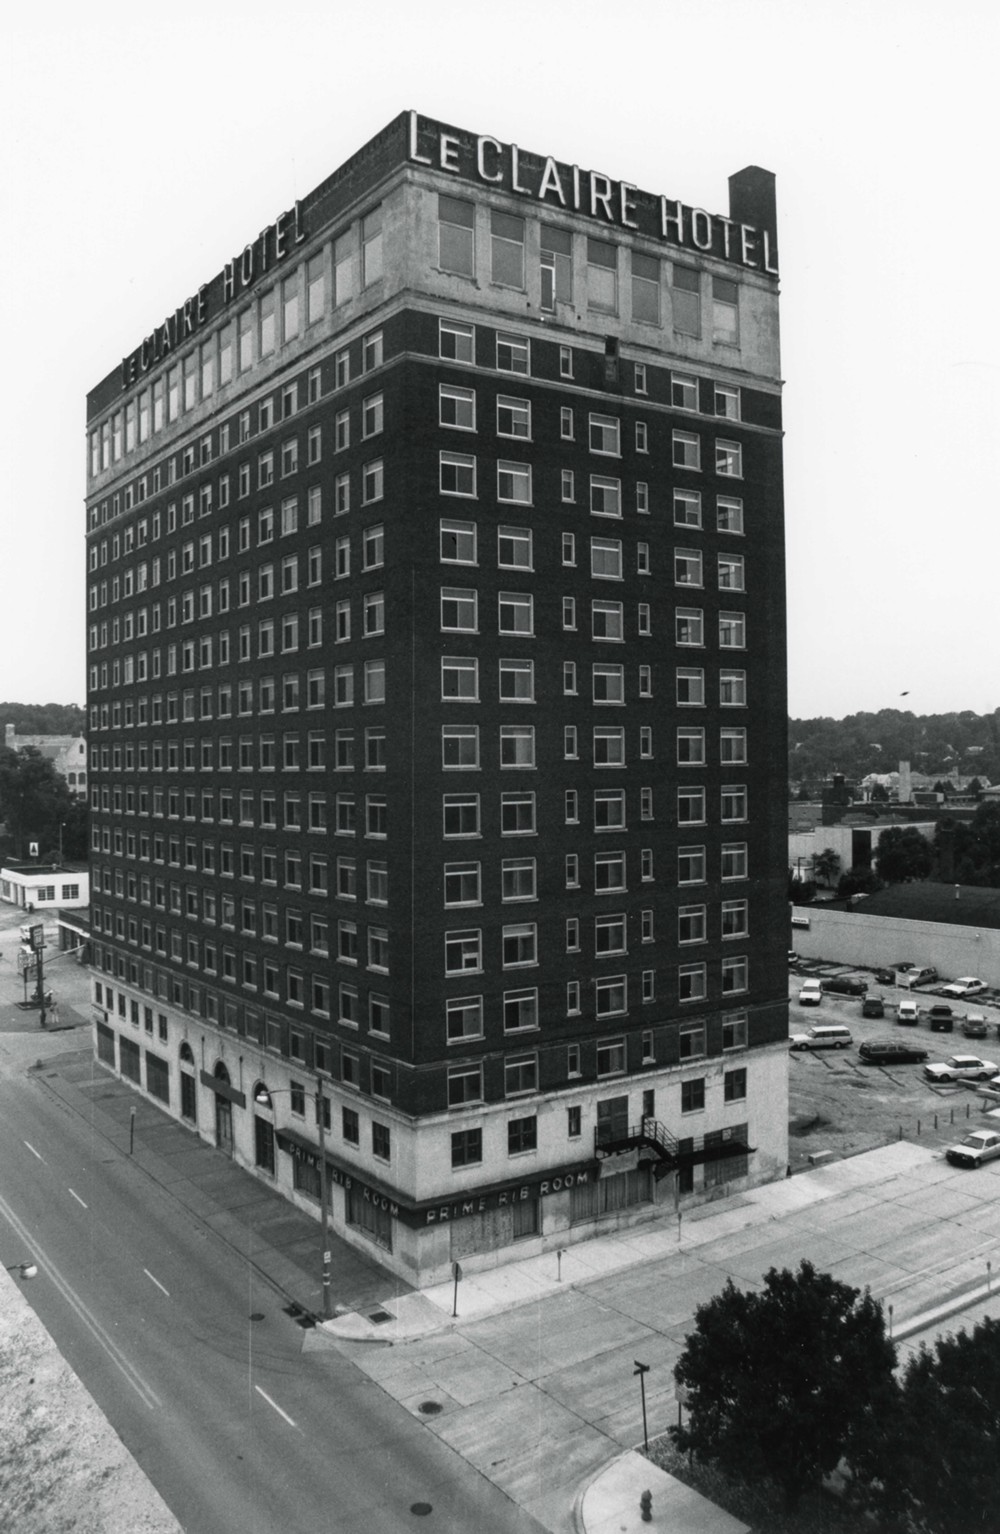 LeClaire Hotel, Moline Illinois General view to southwest (1993)